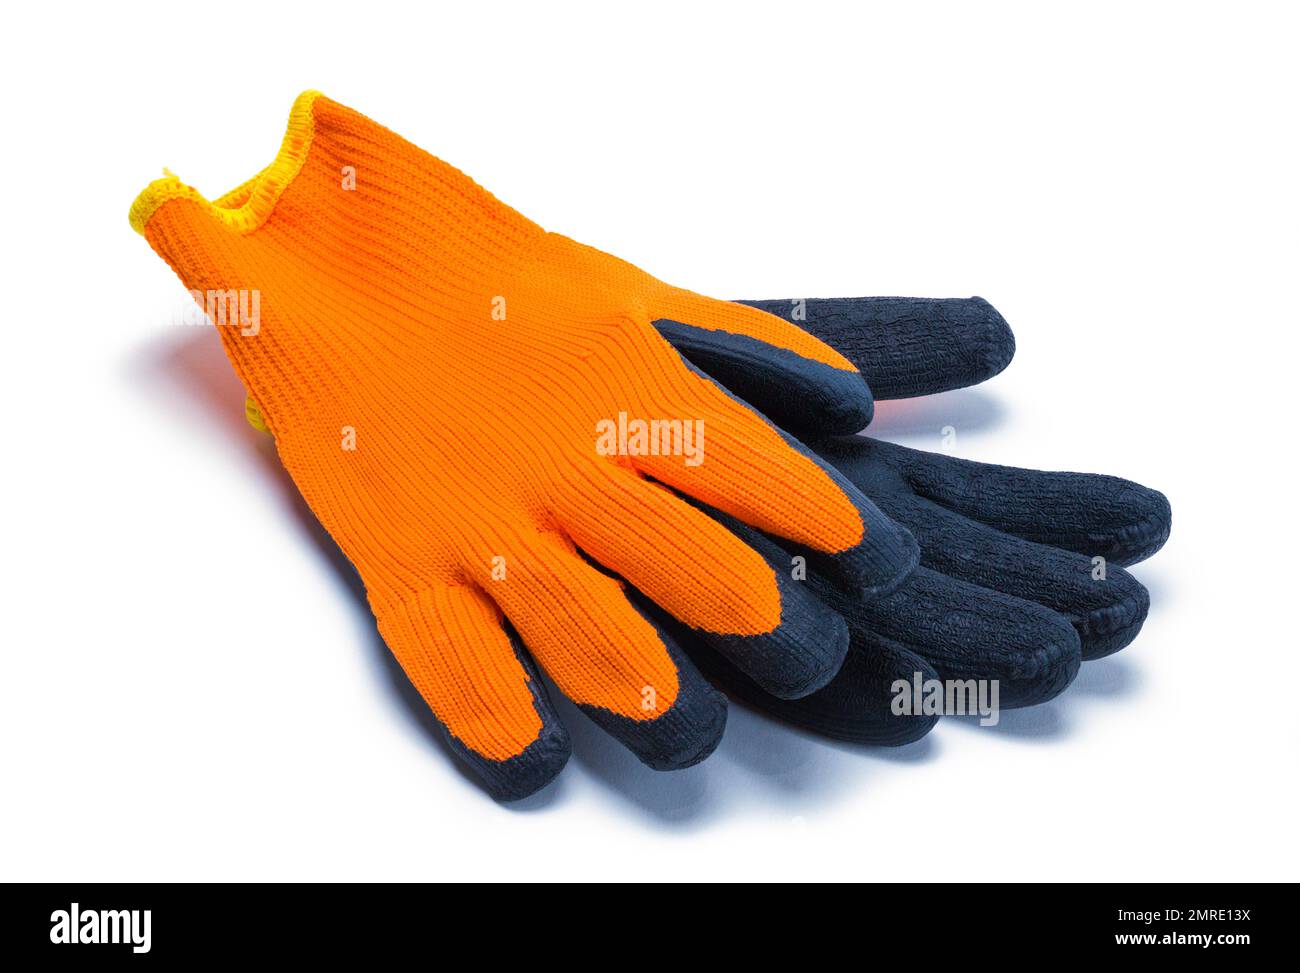 Pair of Orange Rubber Coated Gloves Cut Out on White. Stock Photo